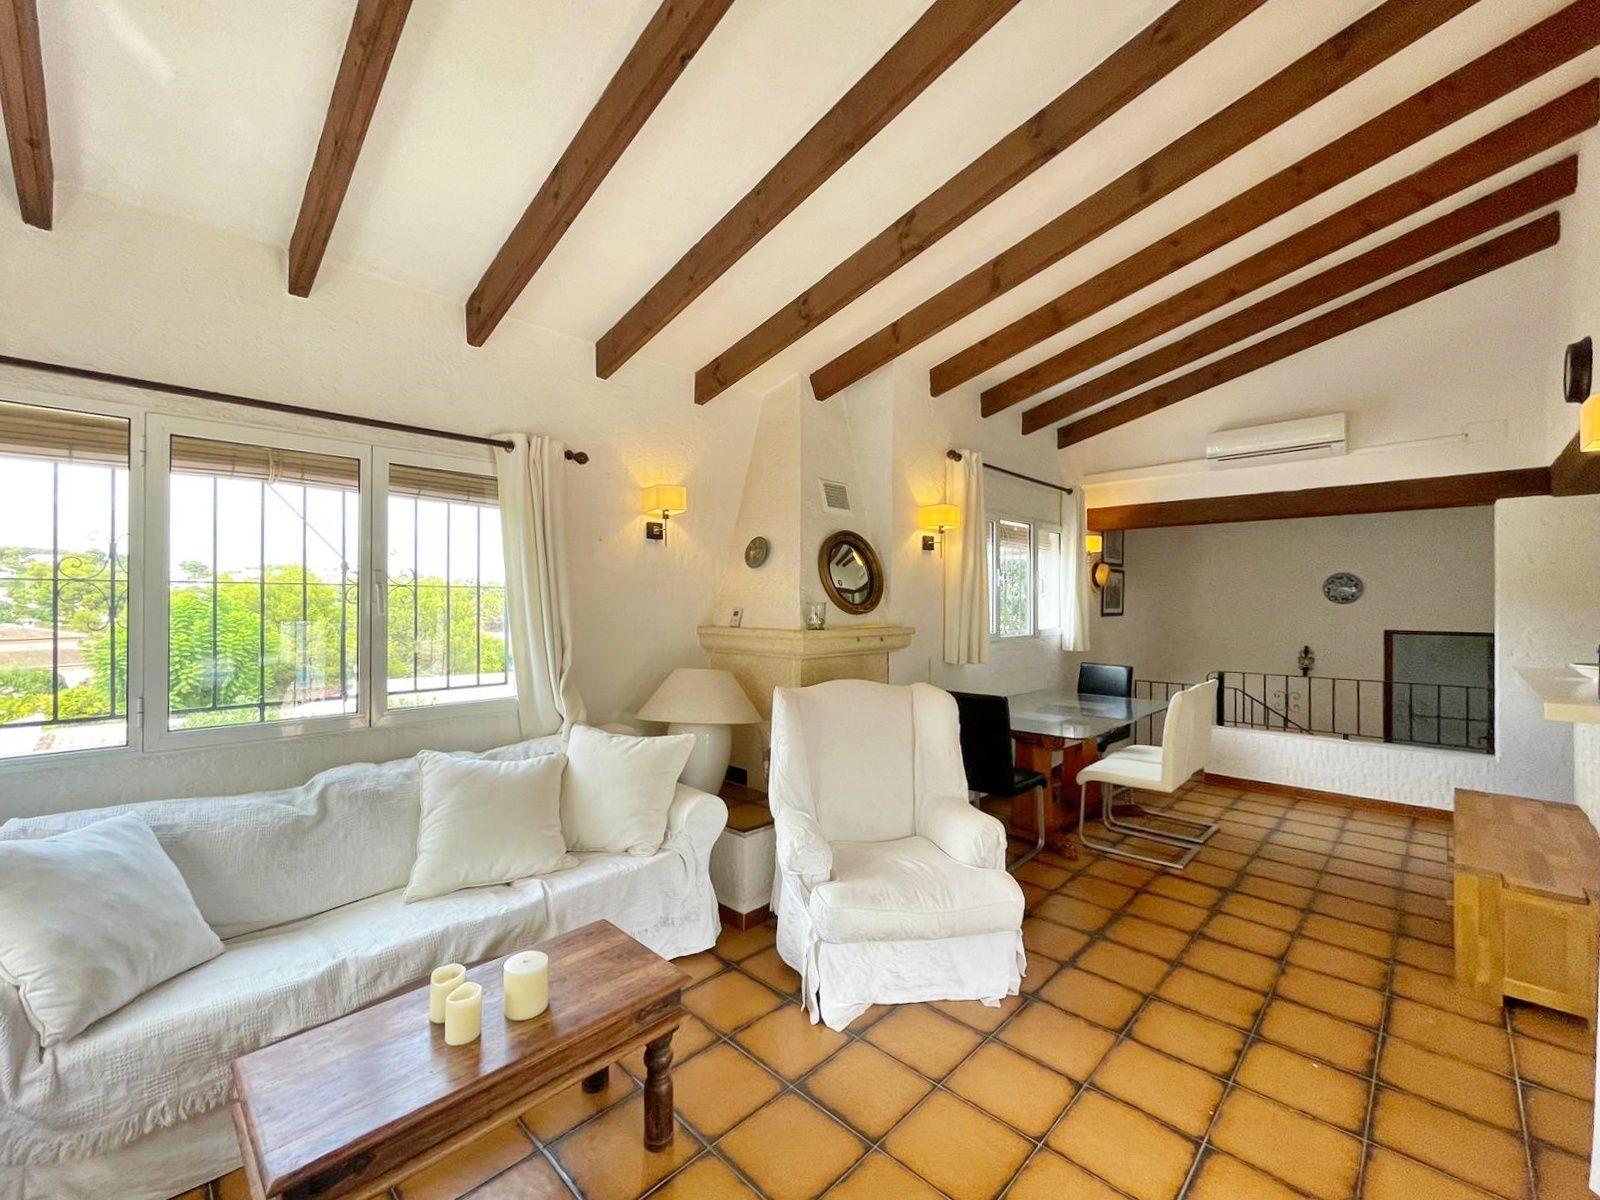 Long-term rental Villa with pool and enclosed garden, close to Moraira town